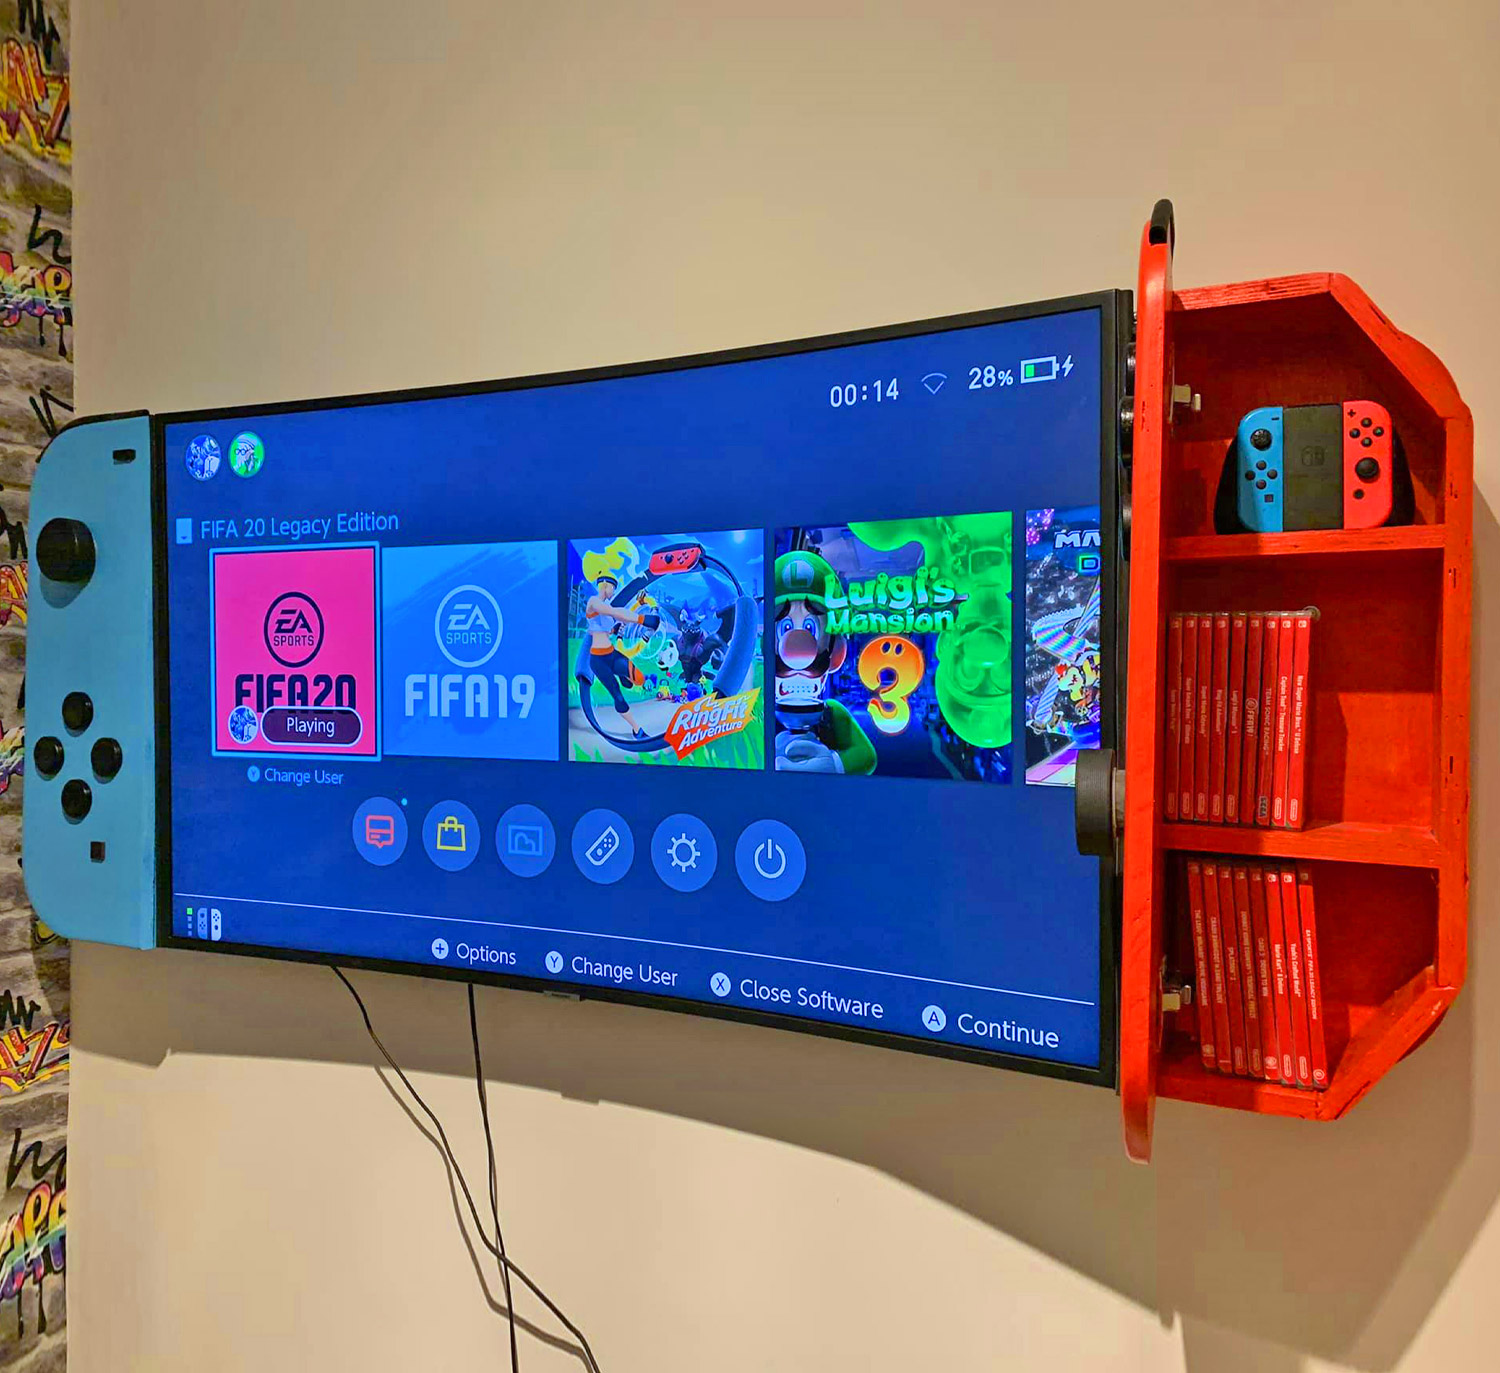 These Wall Mounted Cabinets Turn Your Tv Into A Giant Nintendo Switch